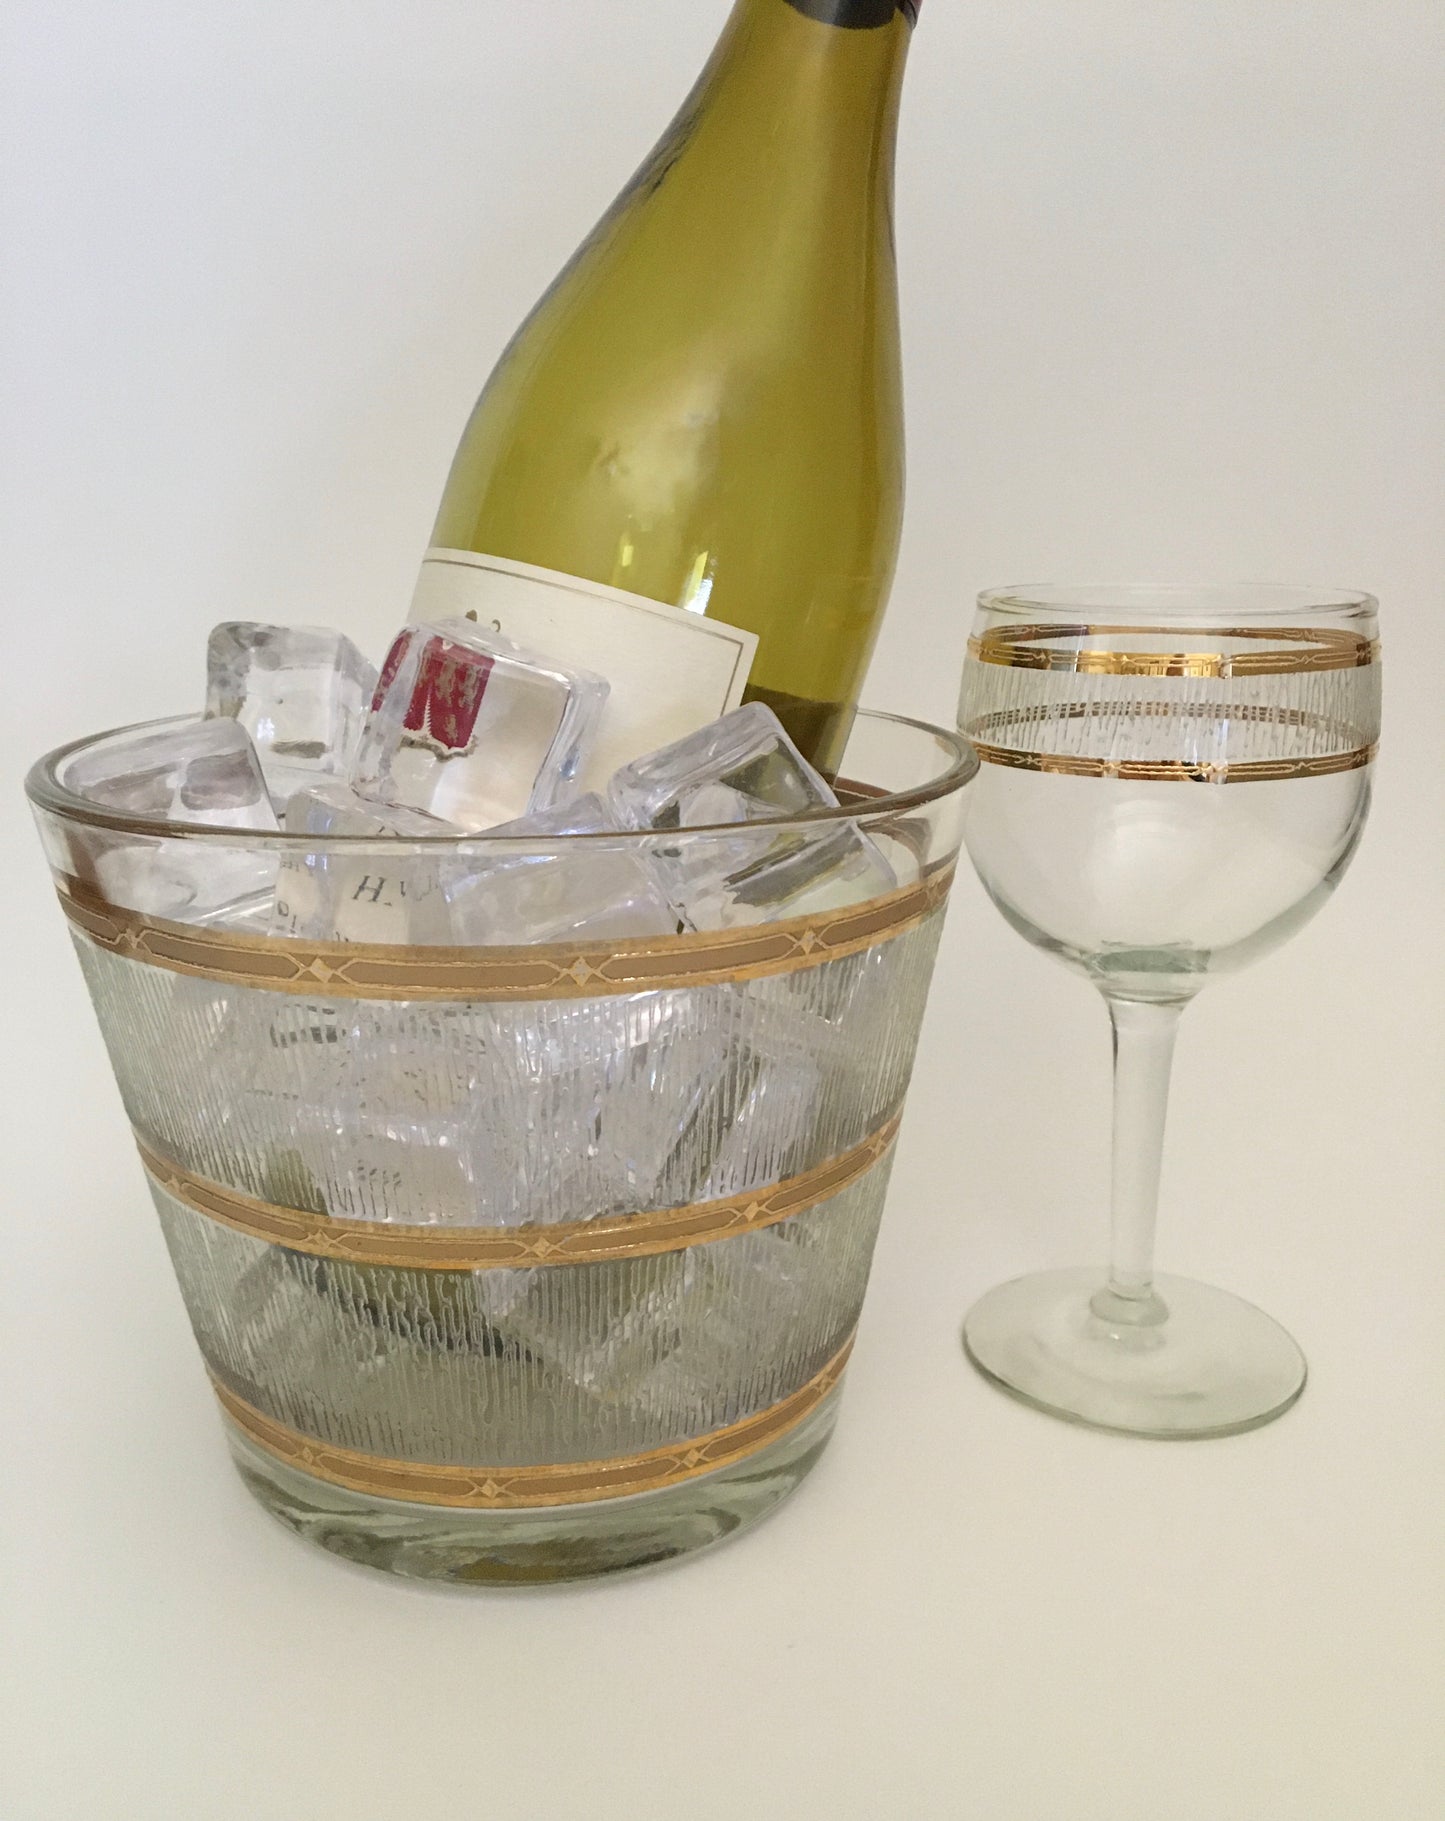 Culver Textured Gold Wine Glasses (2)